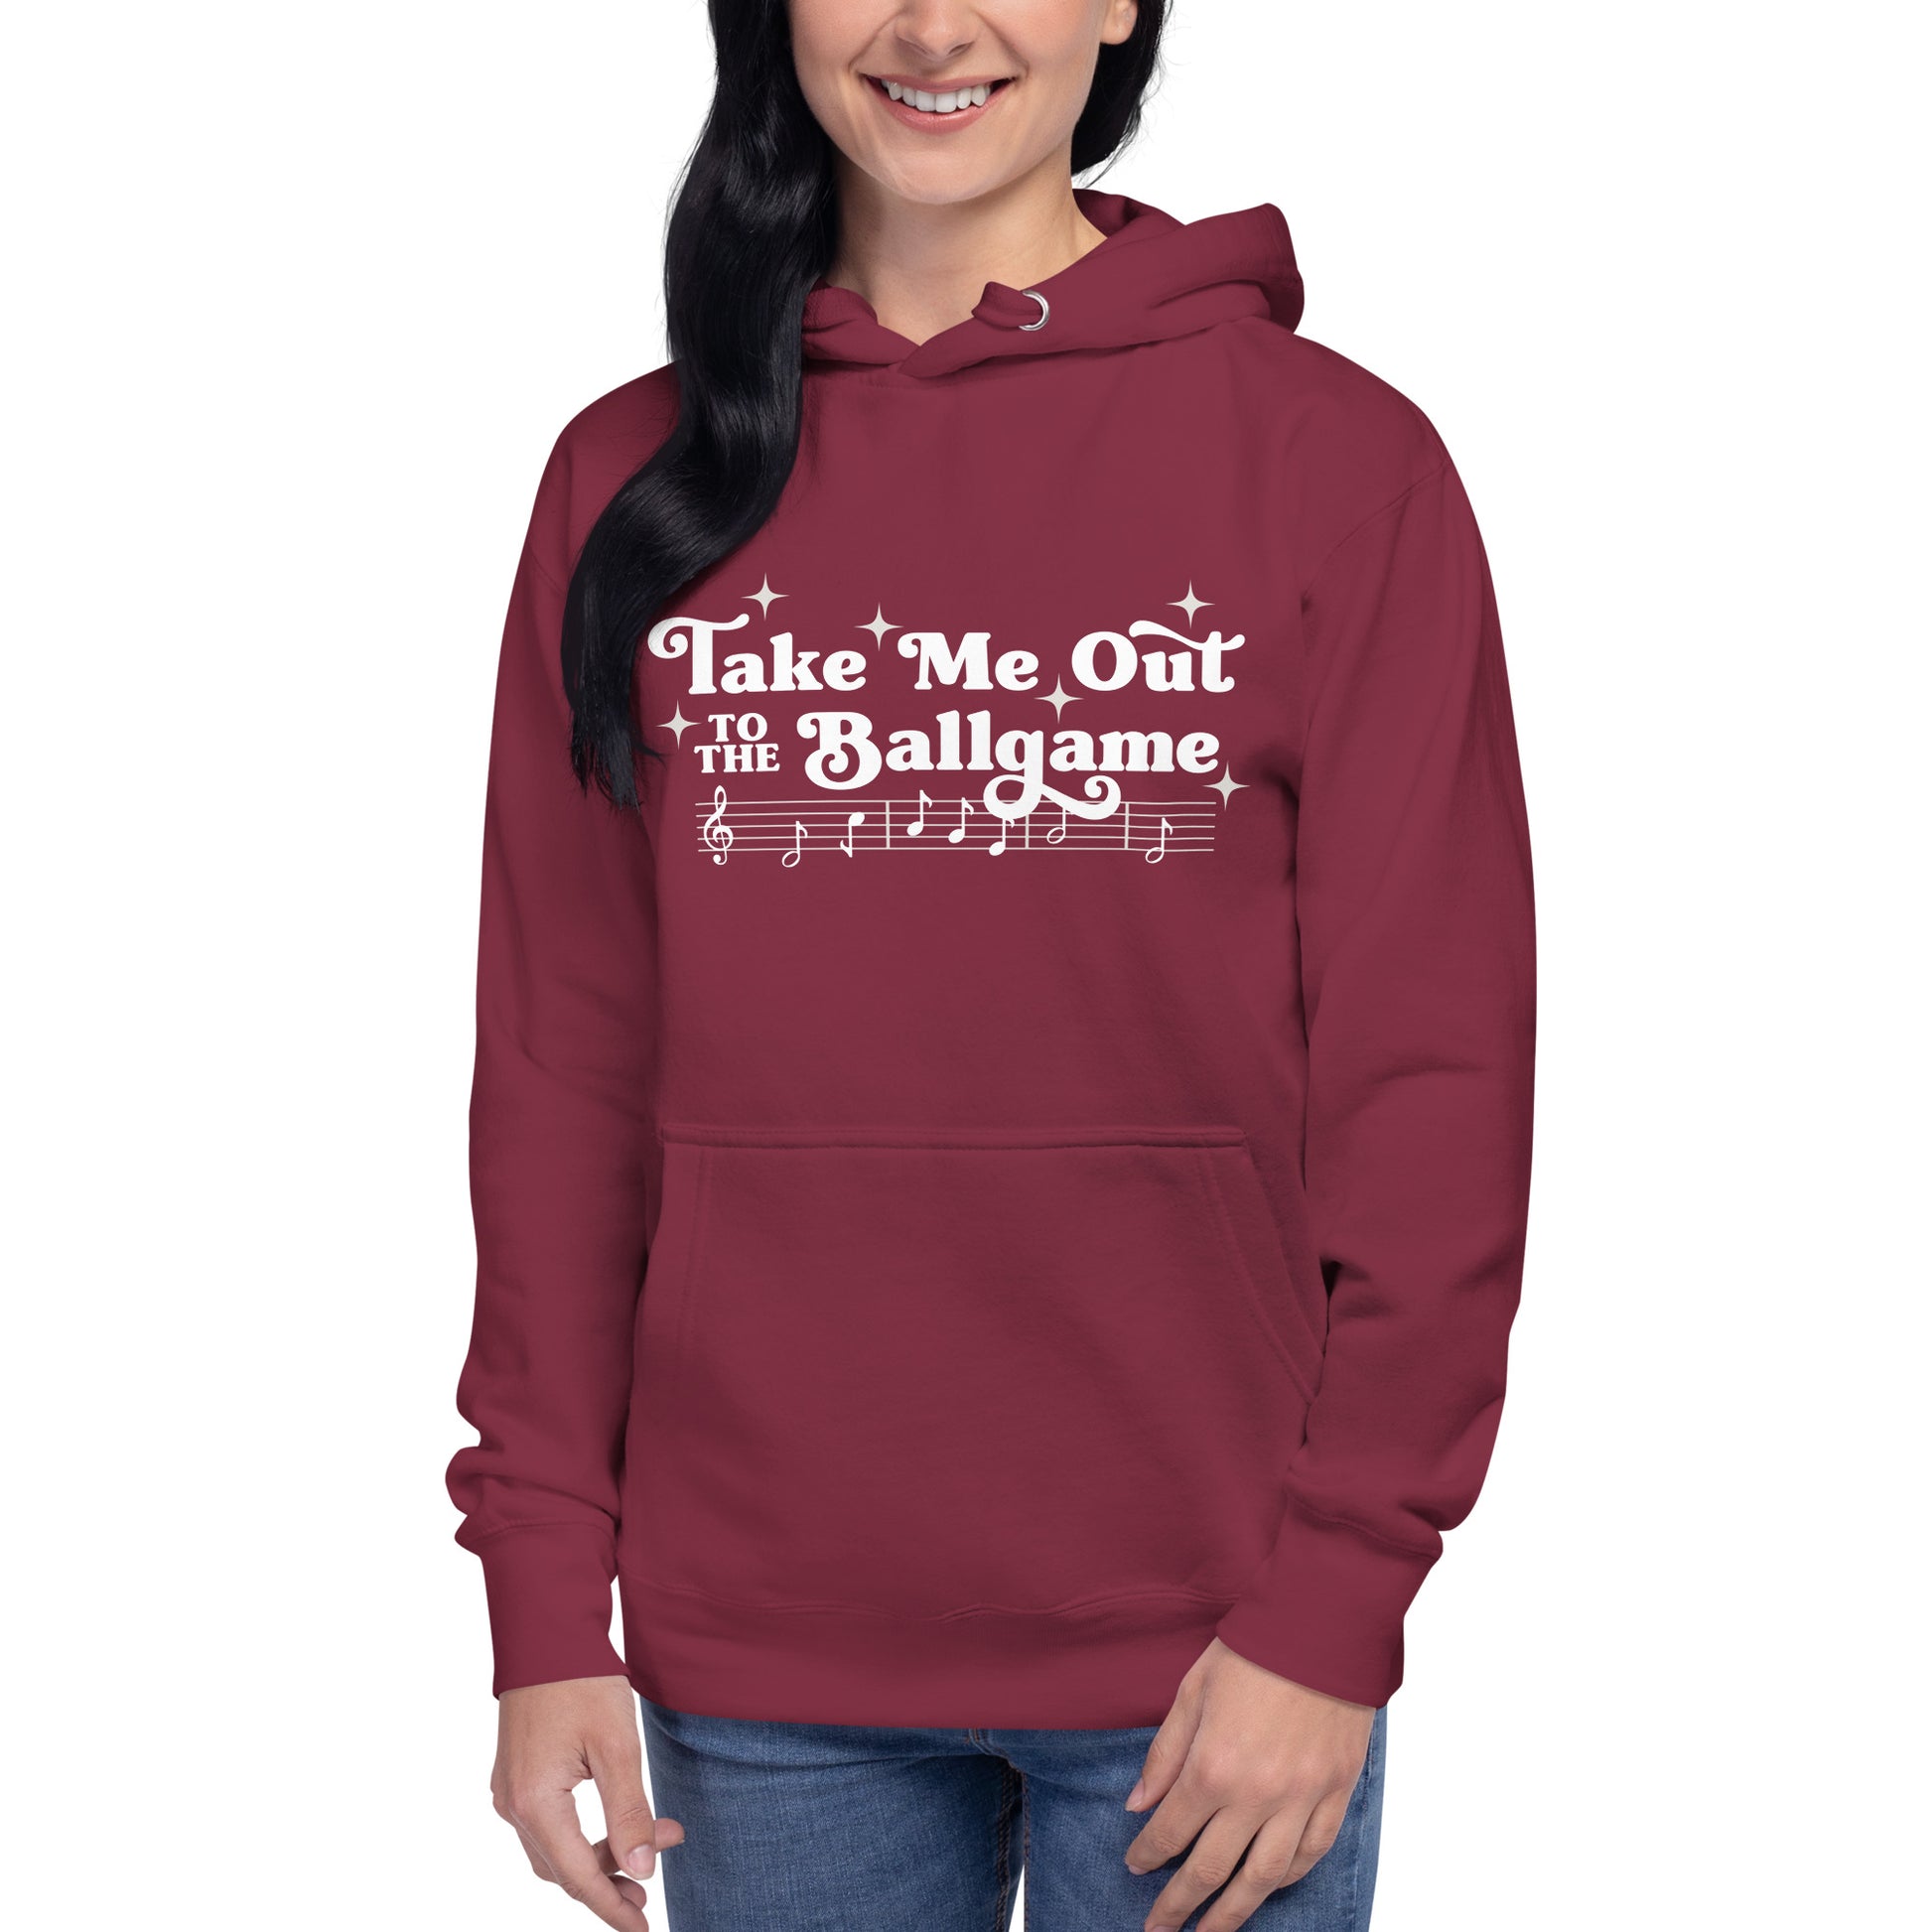 Image of woman wearing dark raspberry hoodie with design of "Take Me Out to the Ballgame" with coordinating musical notes in white located on centre chest. This design is exclusive to Tailgate Mercantile and available only online.